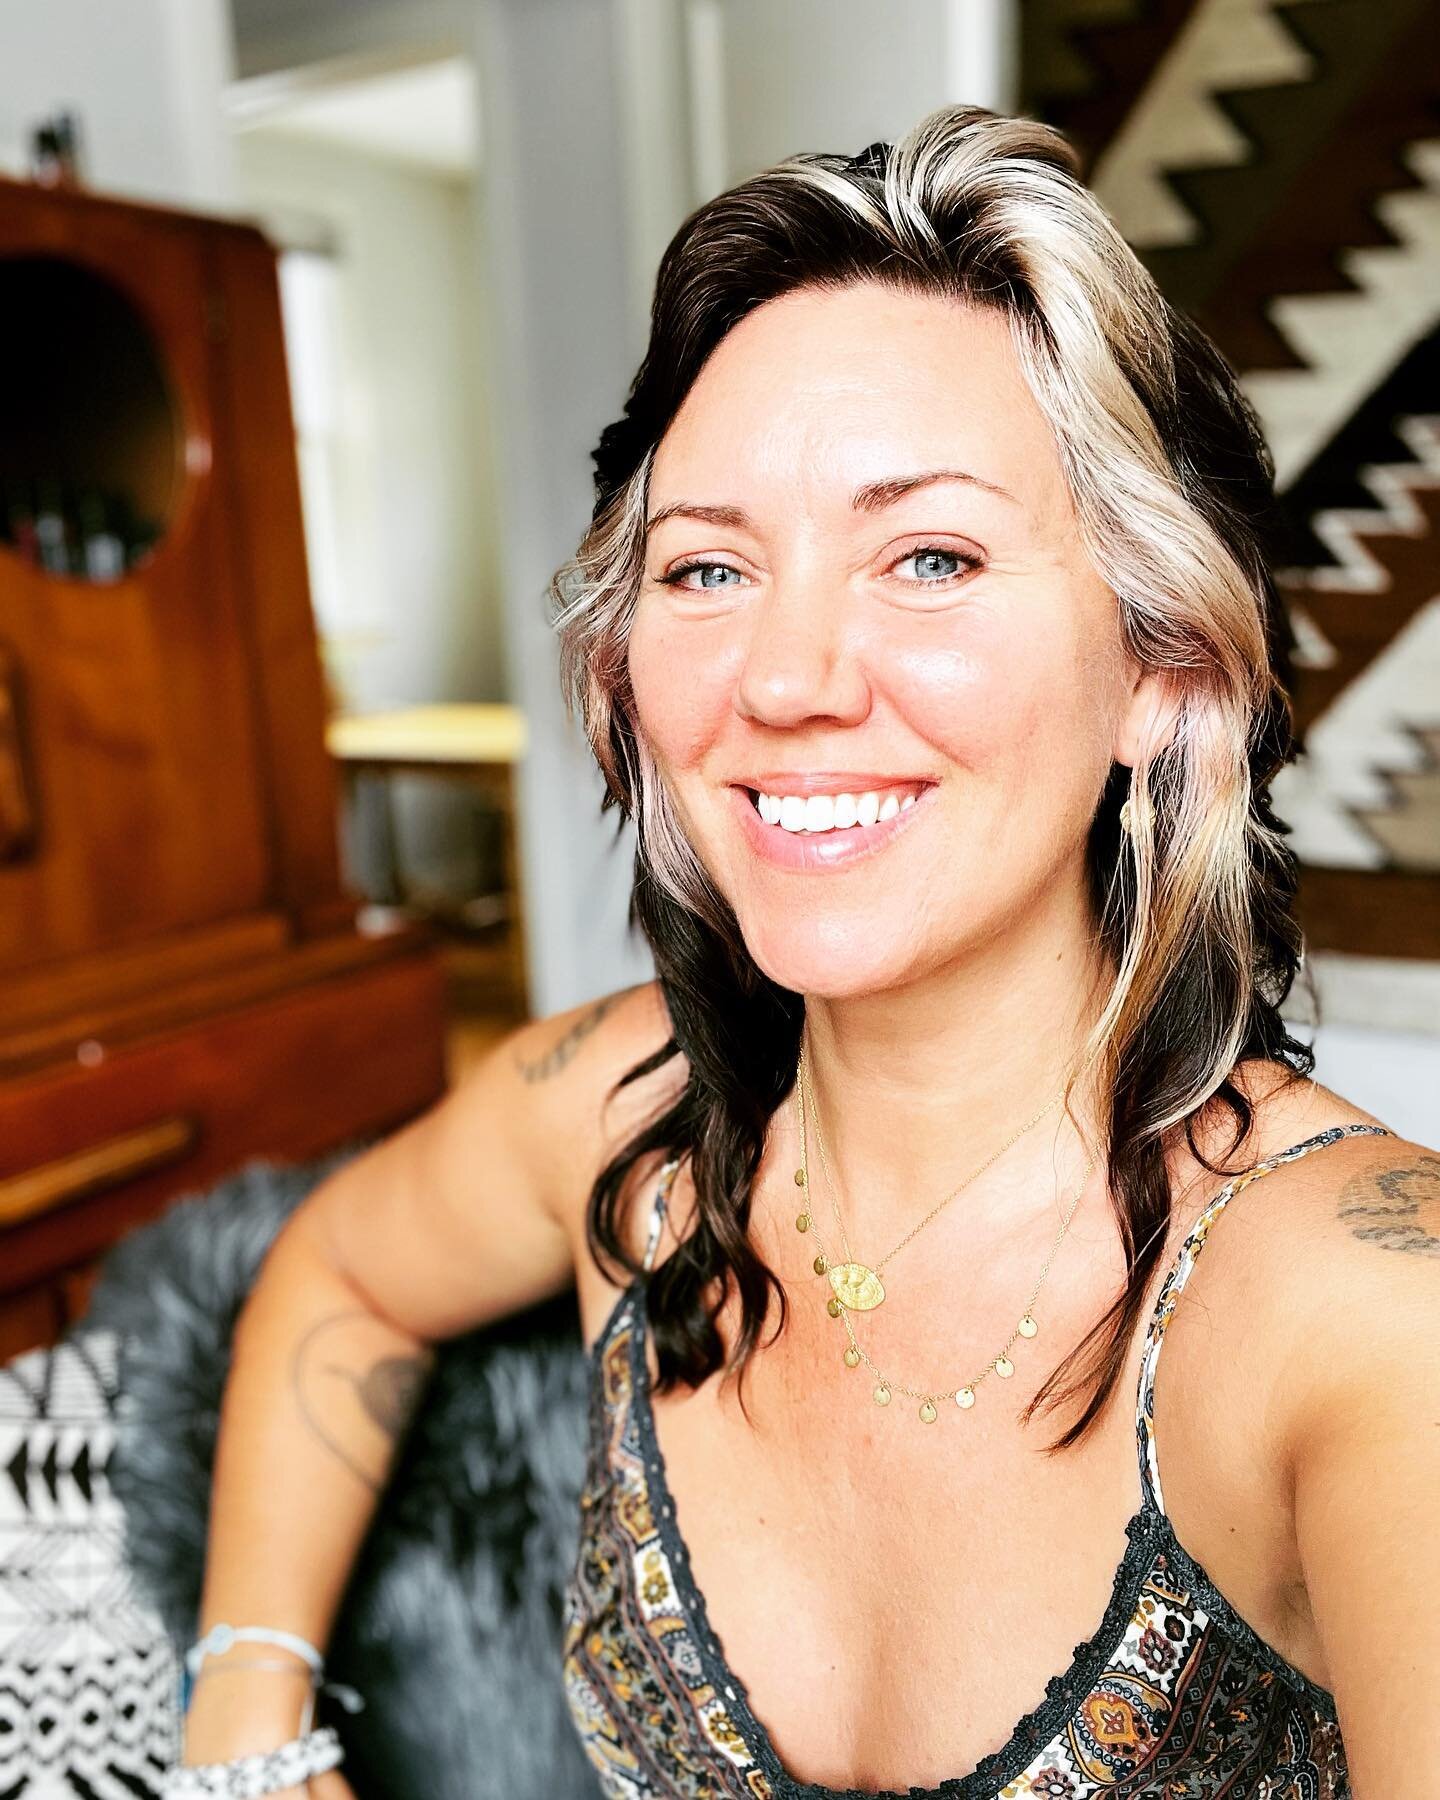 I&rsquo;m home!!! And I just recorded and posted a nice long video of how things are going energetically, astrologically, and cyclically (and personally for me) right now. You can find it at my YouTube channel Luna Scopes (link in bio)  In any case, 